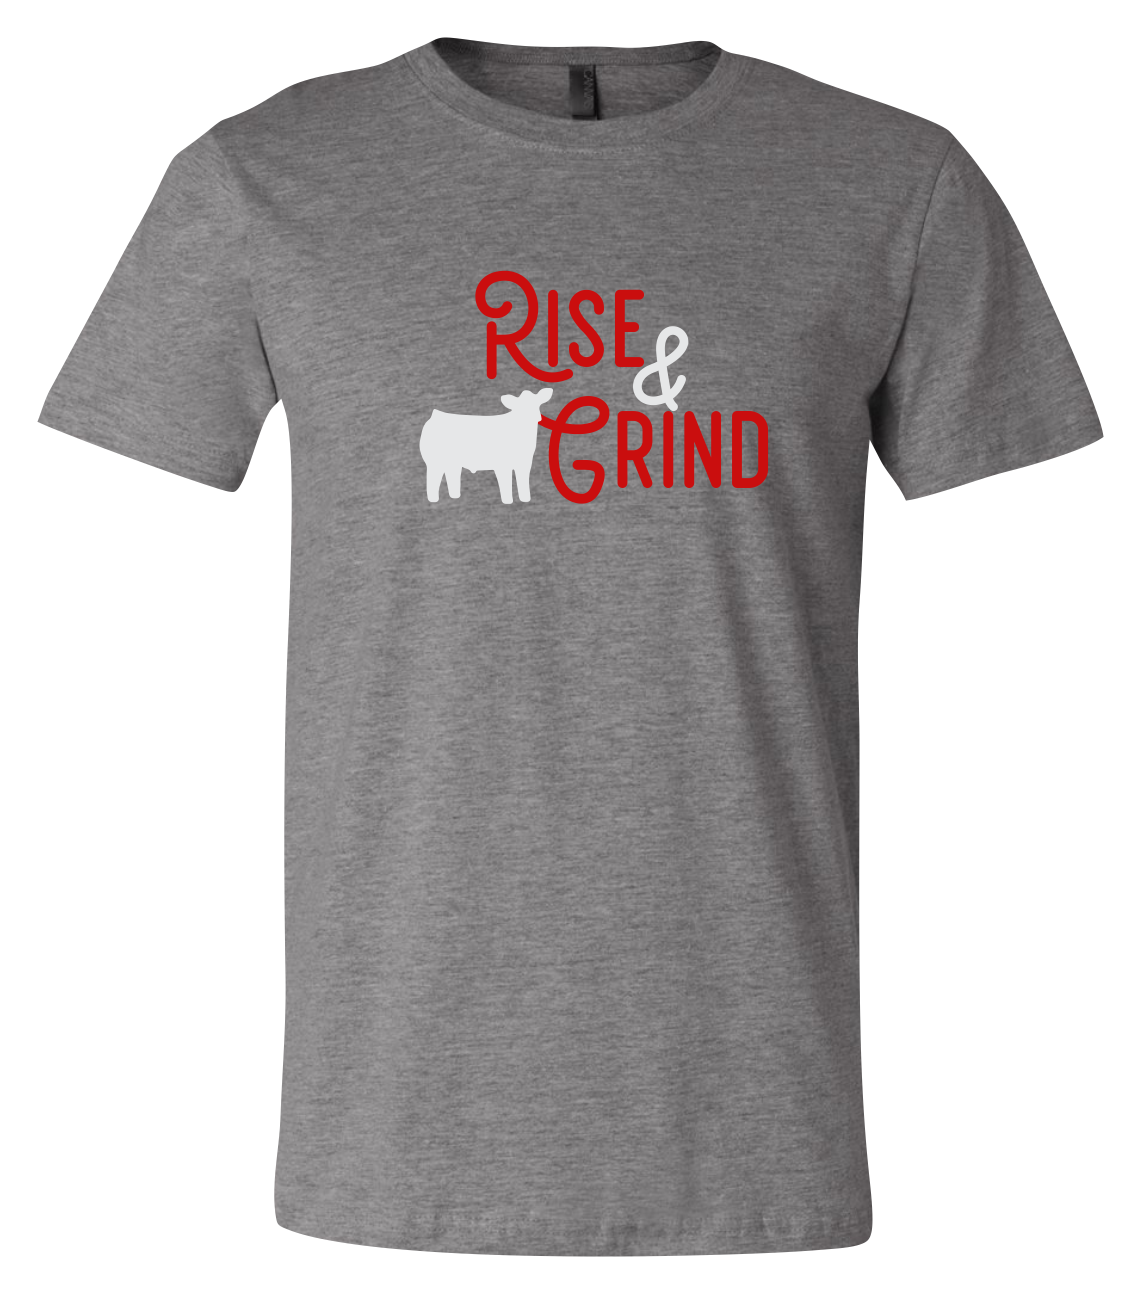 Rise & Grind Short-Sleeve Graphic T-shirt